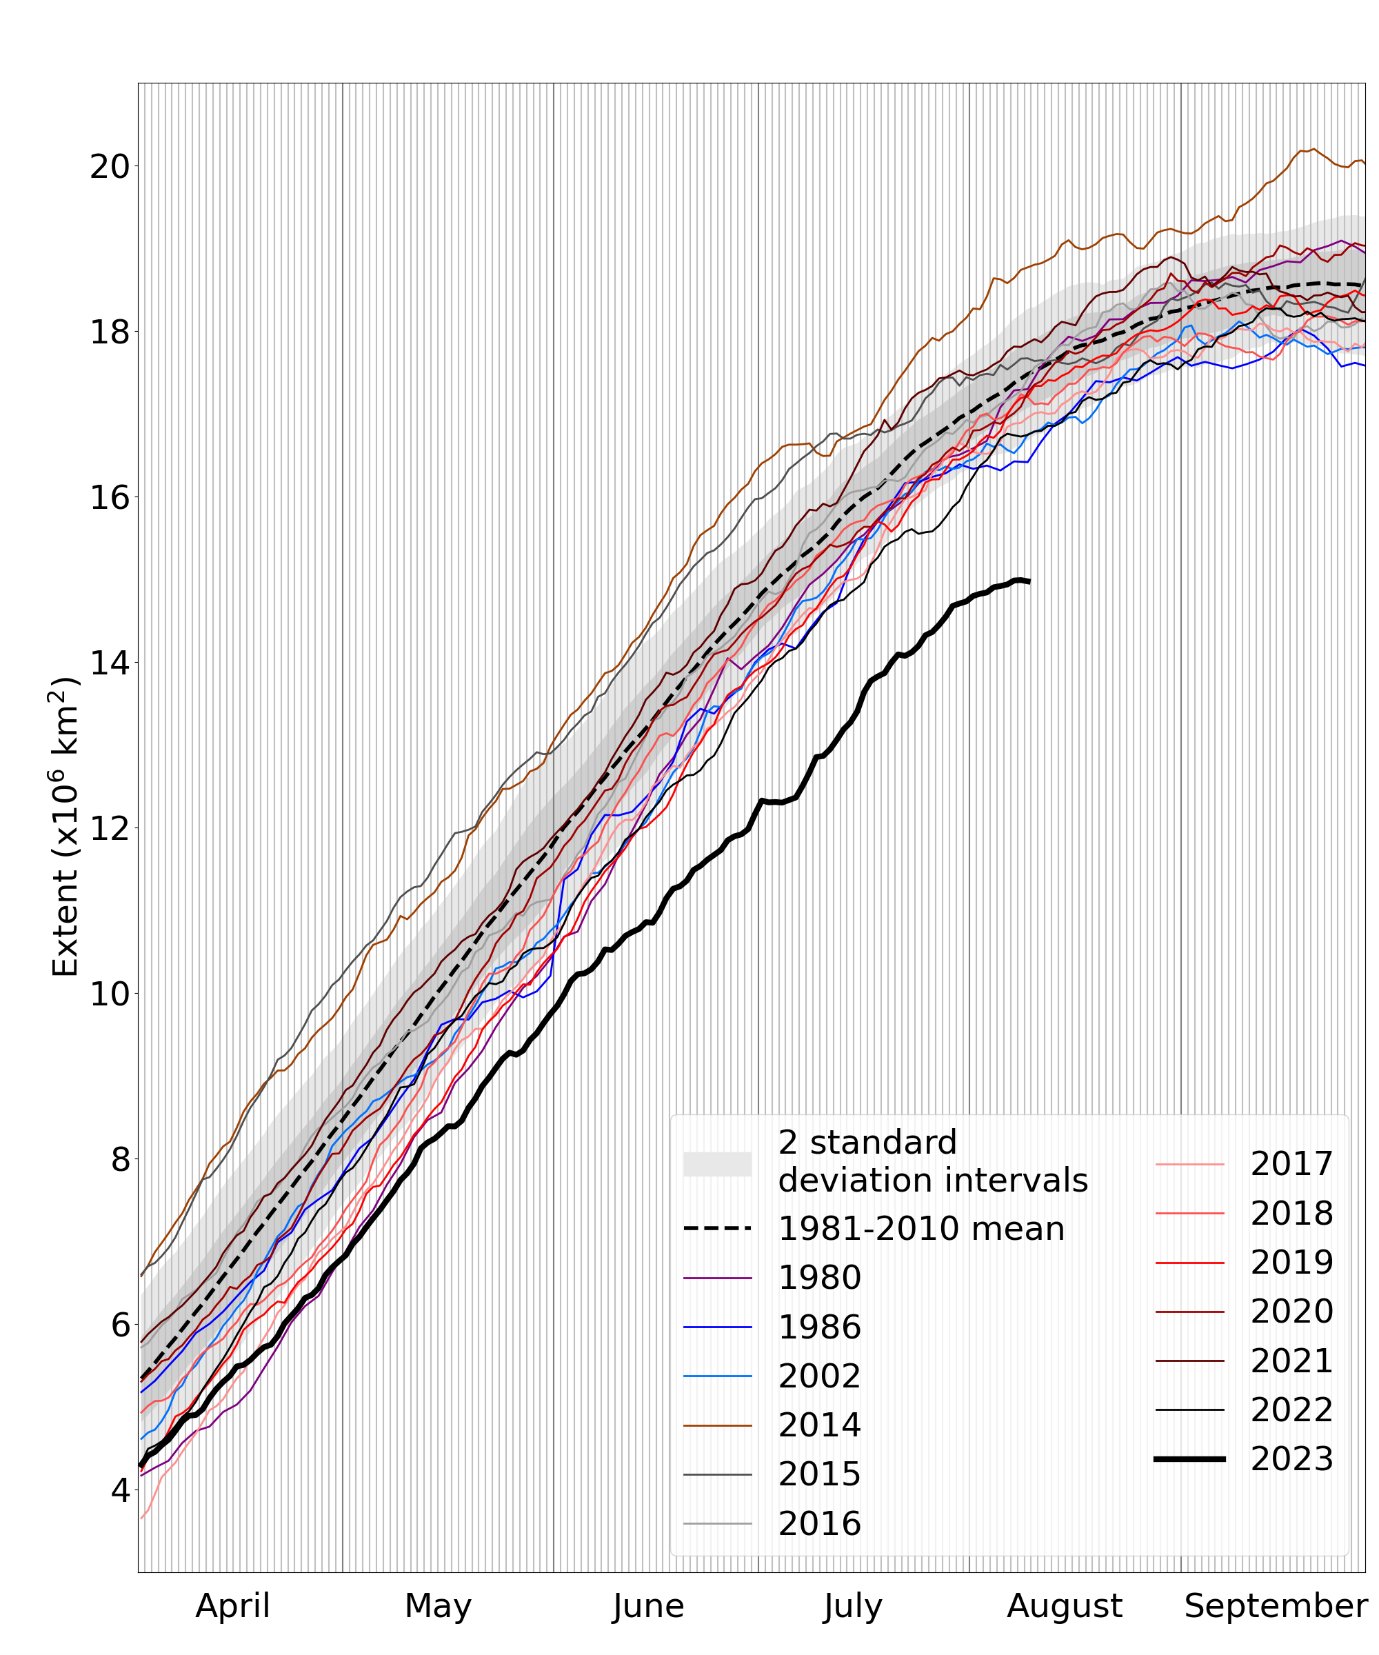 Daily Antarctic sea ice extent for 2023, compared with recent years, selected other low ice years, and the 1981-2010 average, with ± 1 and 2 standard deviation intervals indicated by the shaded areas. Data are from NSIDC.